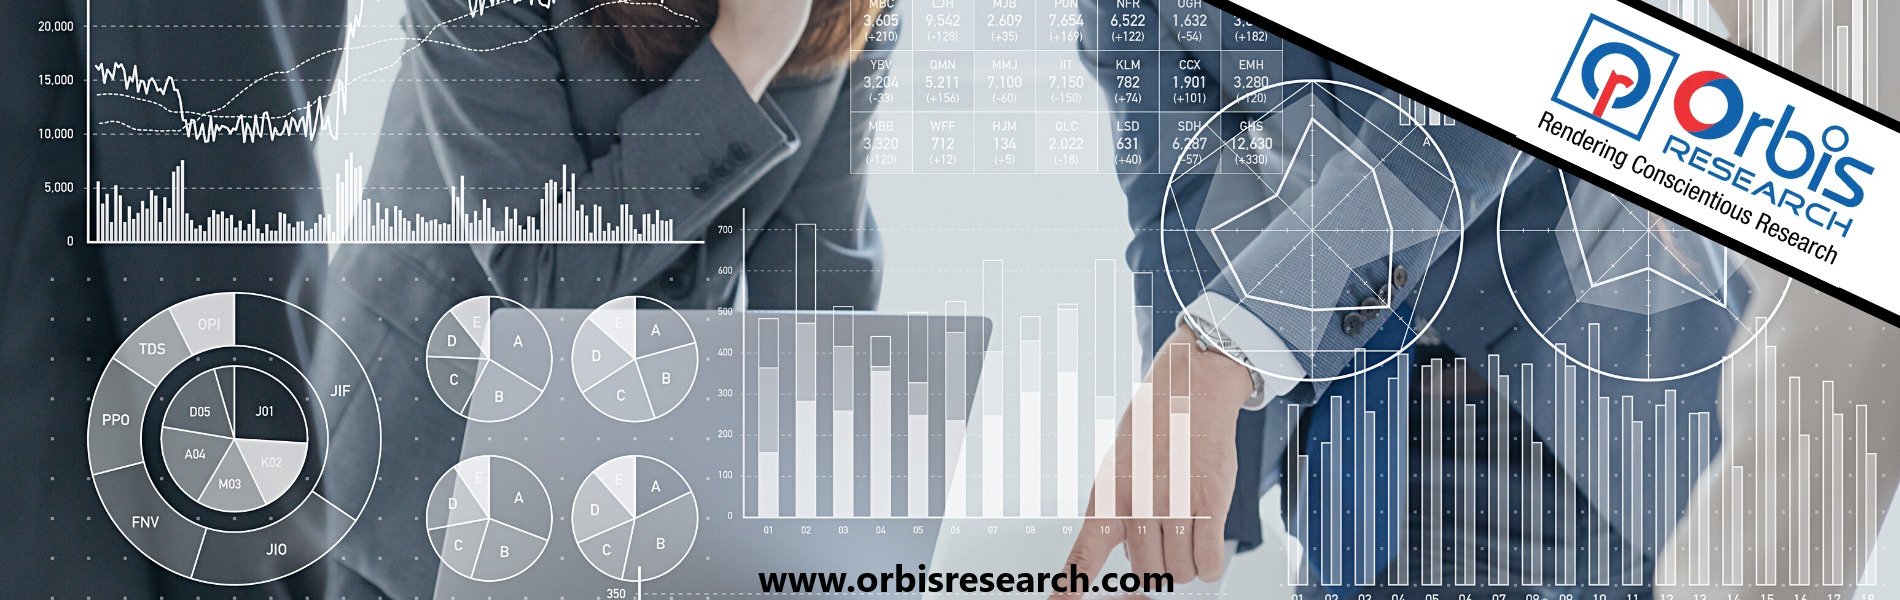 2022-2029 Global NoSQL Databases Software Professional Market Research Report, Analysis from Perspective of Segmentation (Competitor Landscape, Type, Application, and Geography)